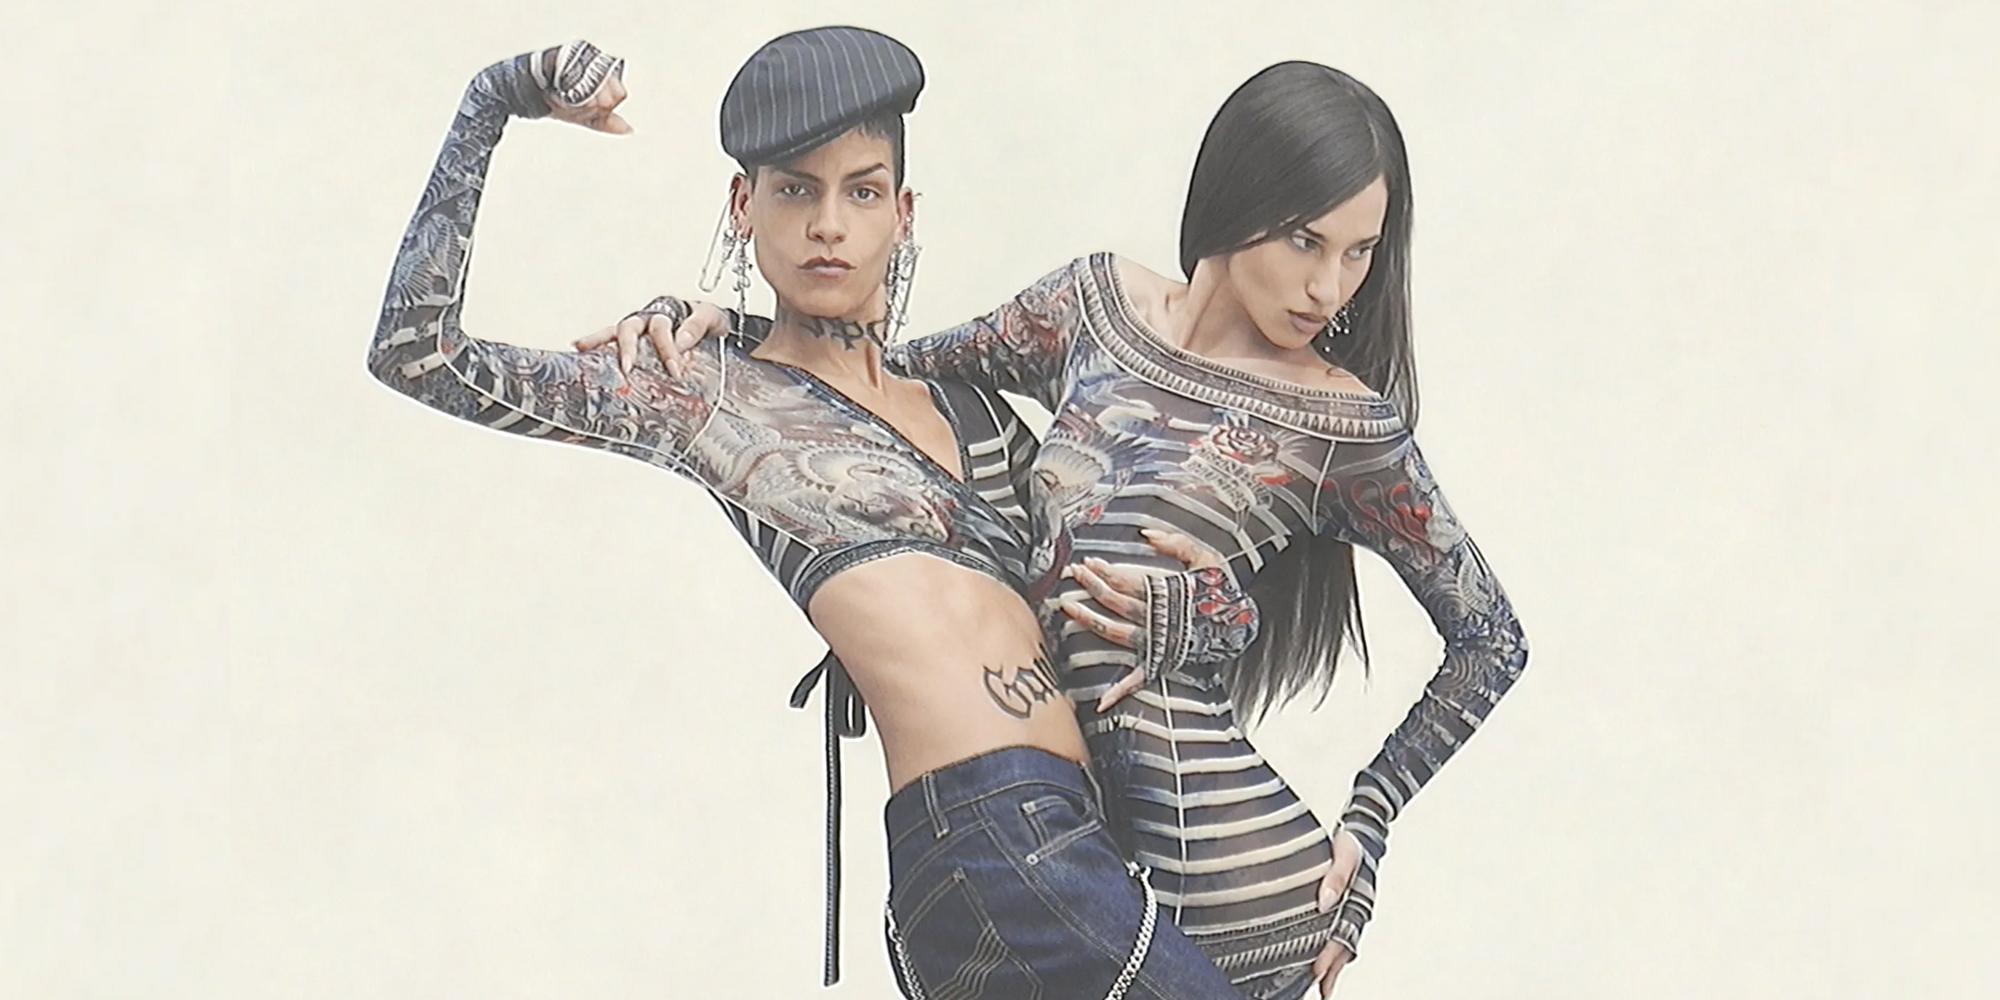 JEAN PAUL GAULTIER TATTOO COLLECTION